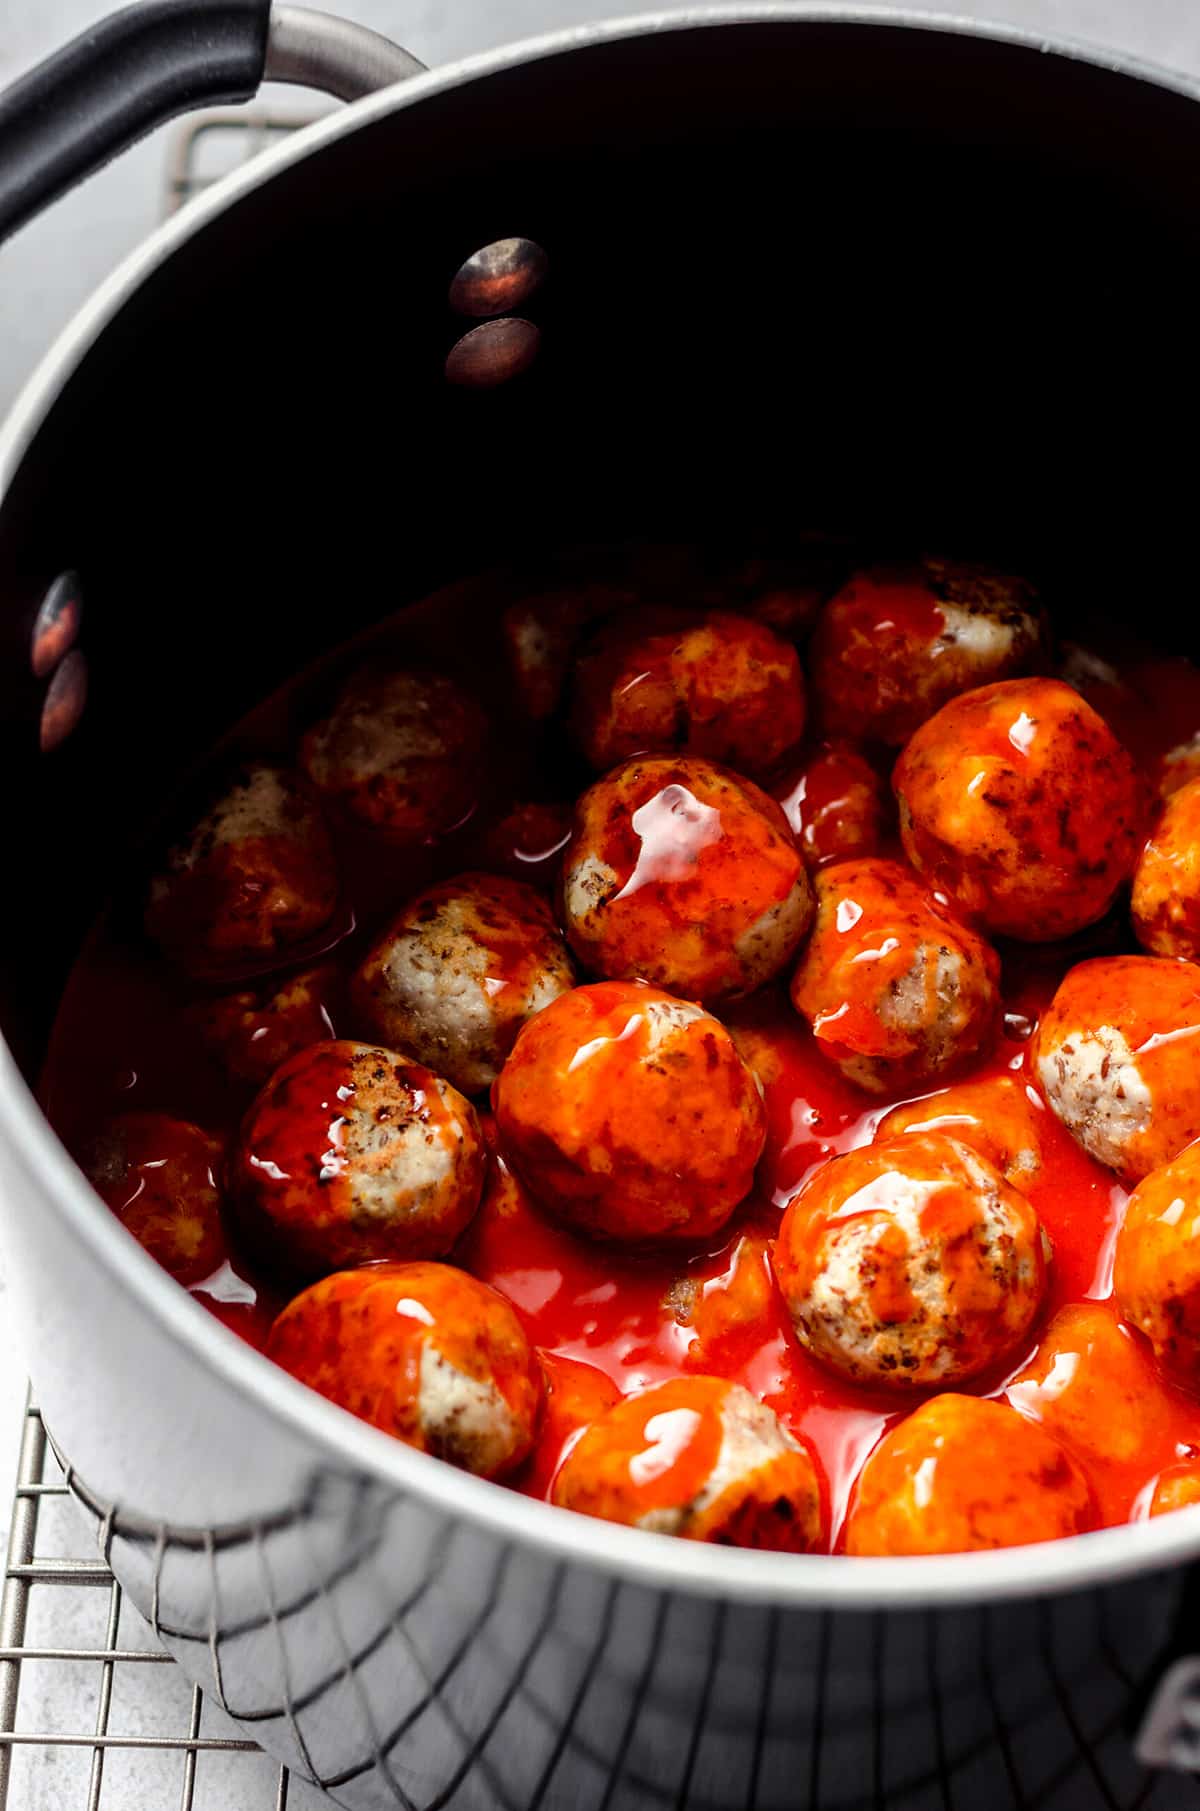 Meatballs tossed with buffalo sauce in a saucepan.